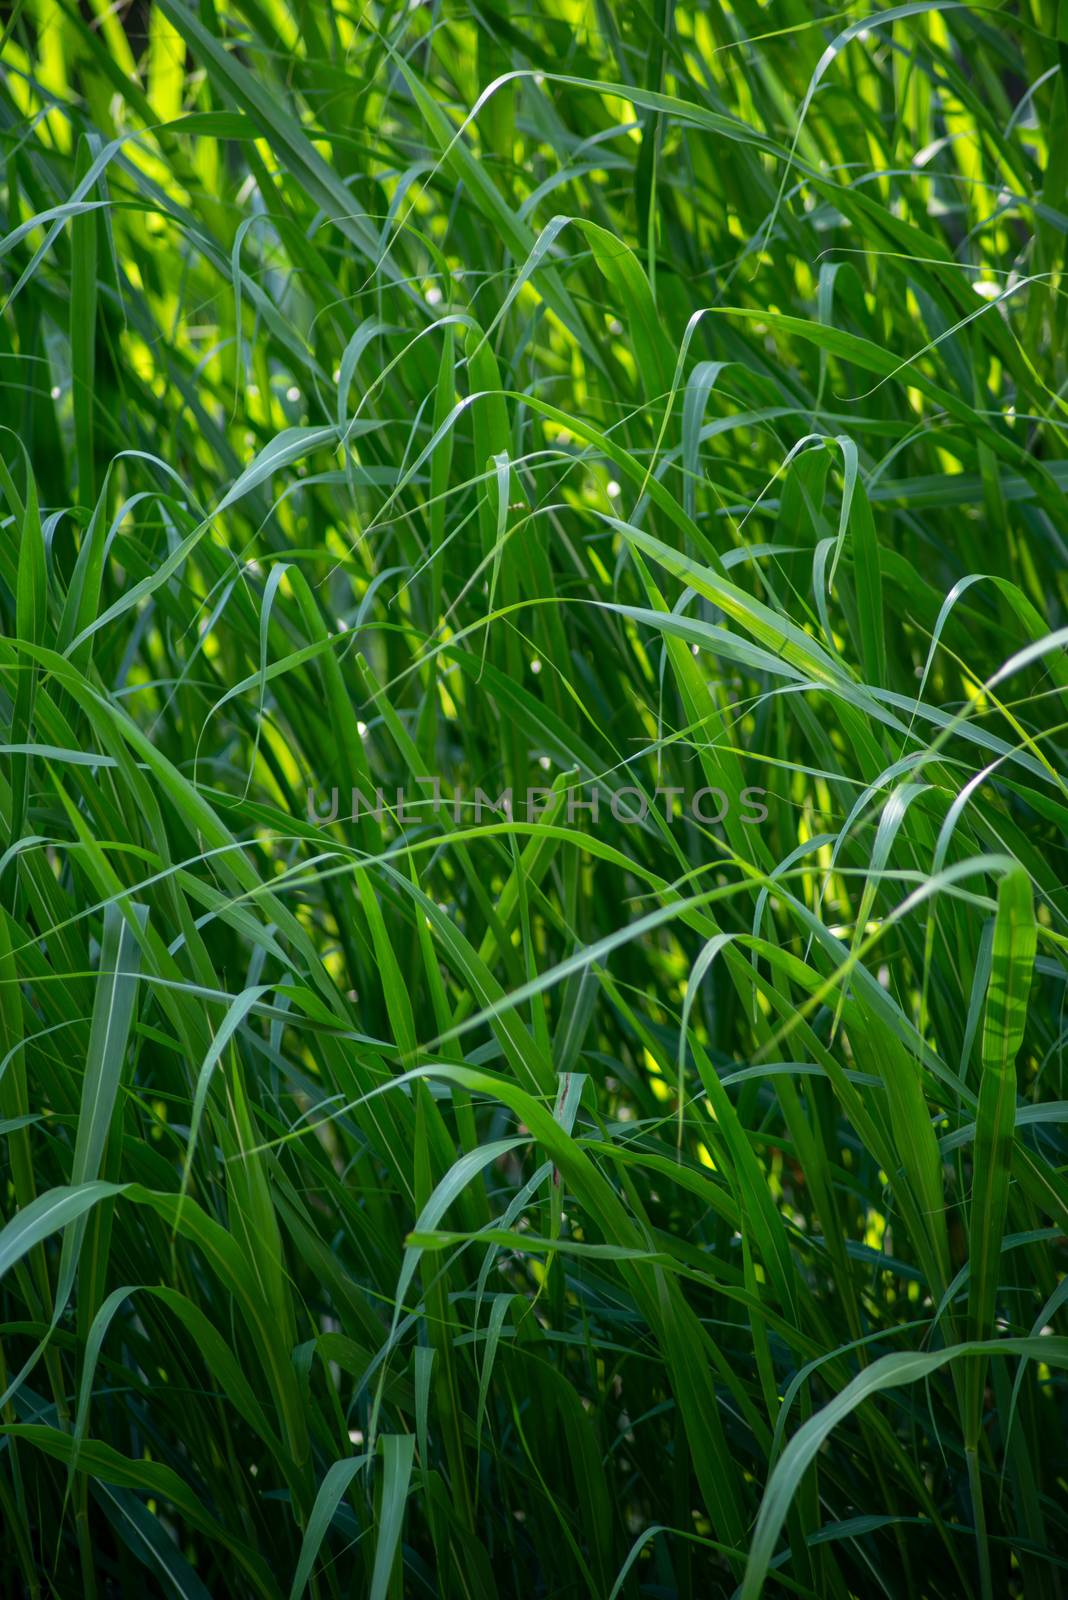 Yellow sunlight filters through tall swooping grass. Peaceful green nature background with copy space.